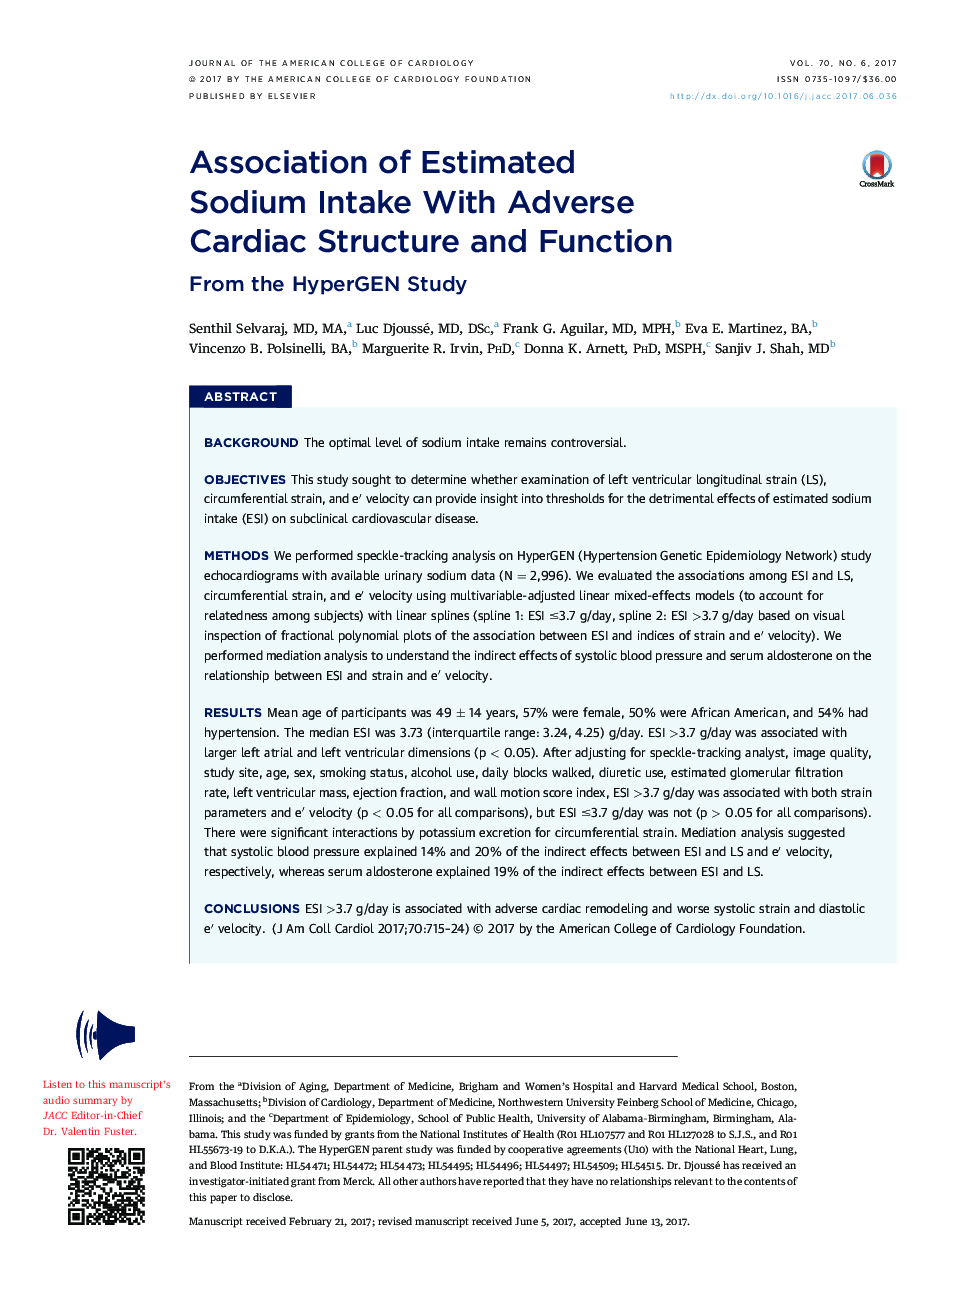 Association of Estimated SodiumÂ IntakeÂ With Adverse Cardiac Structure andÂ Function